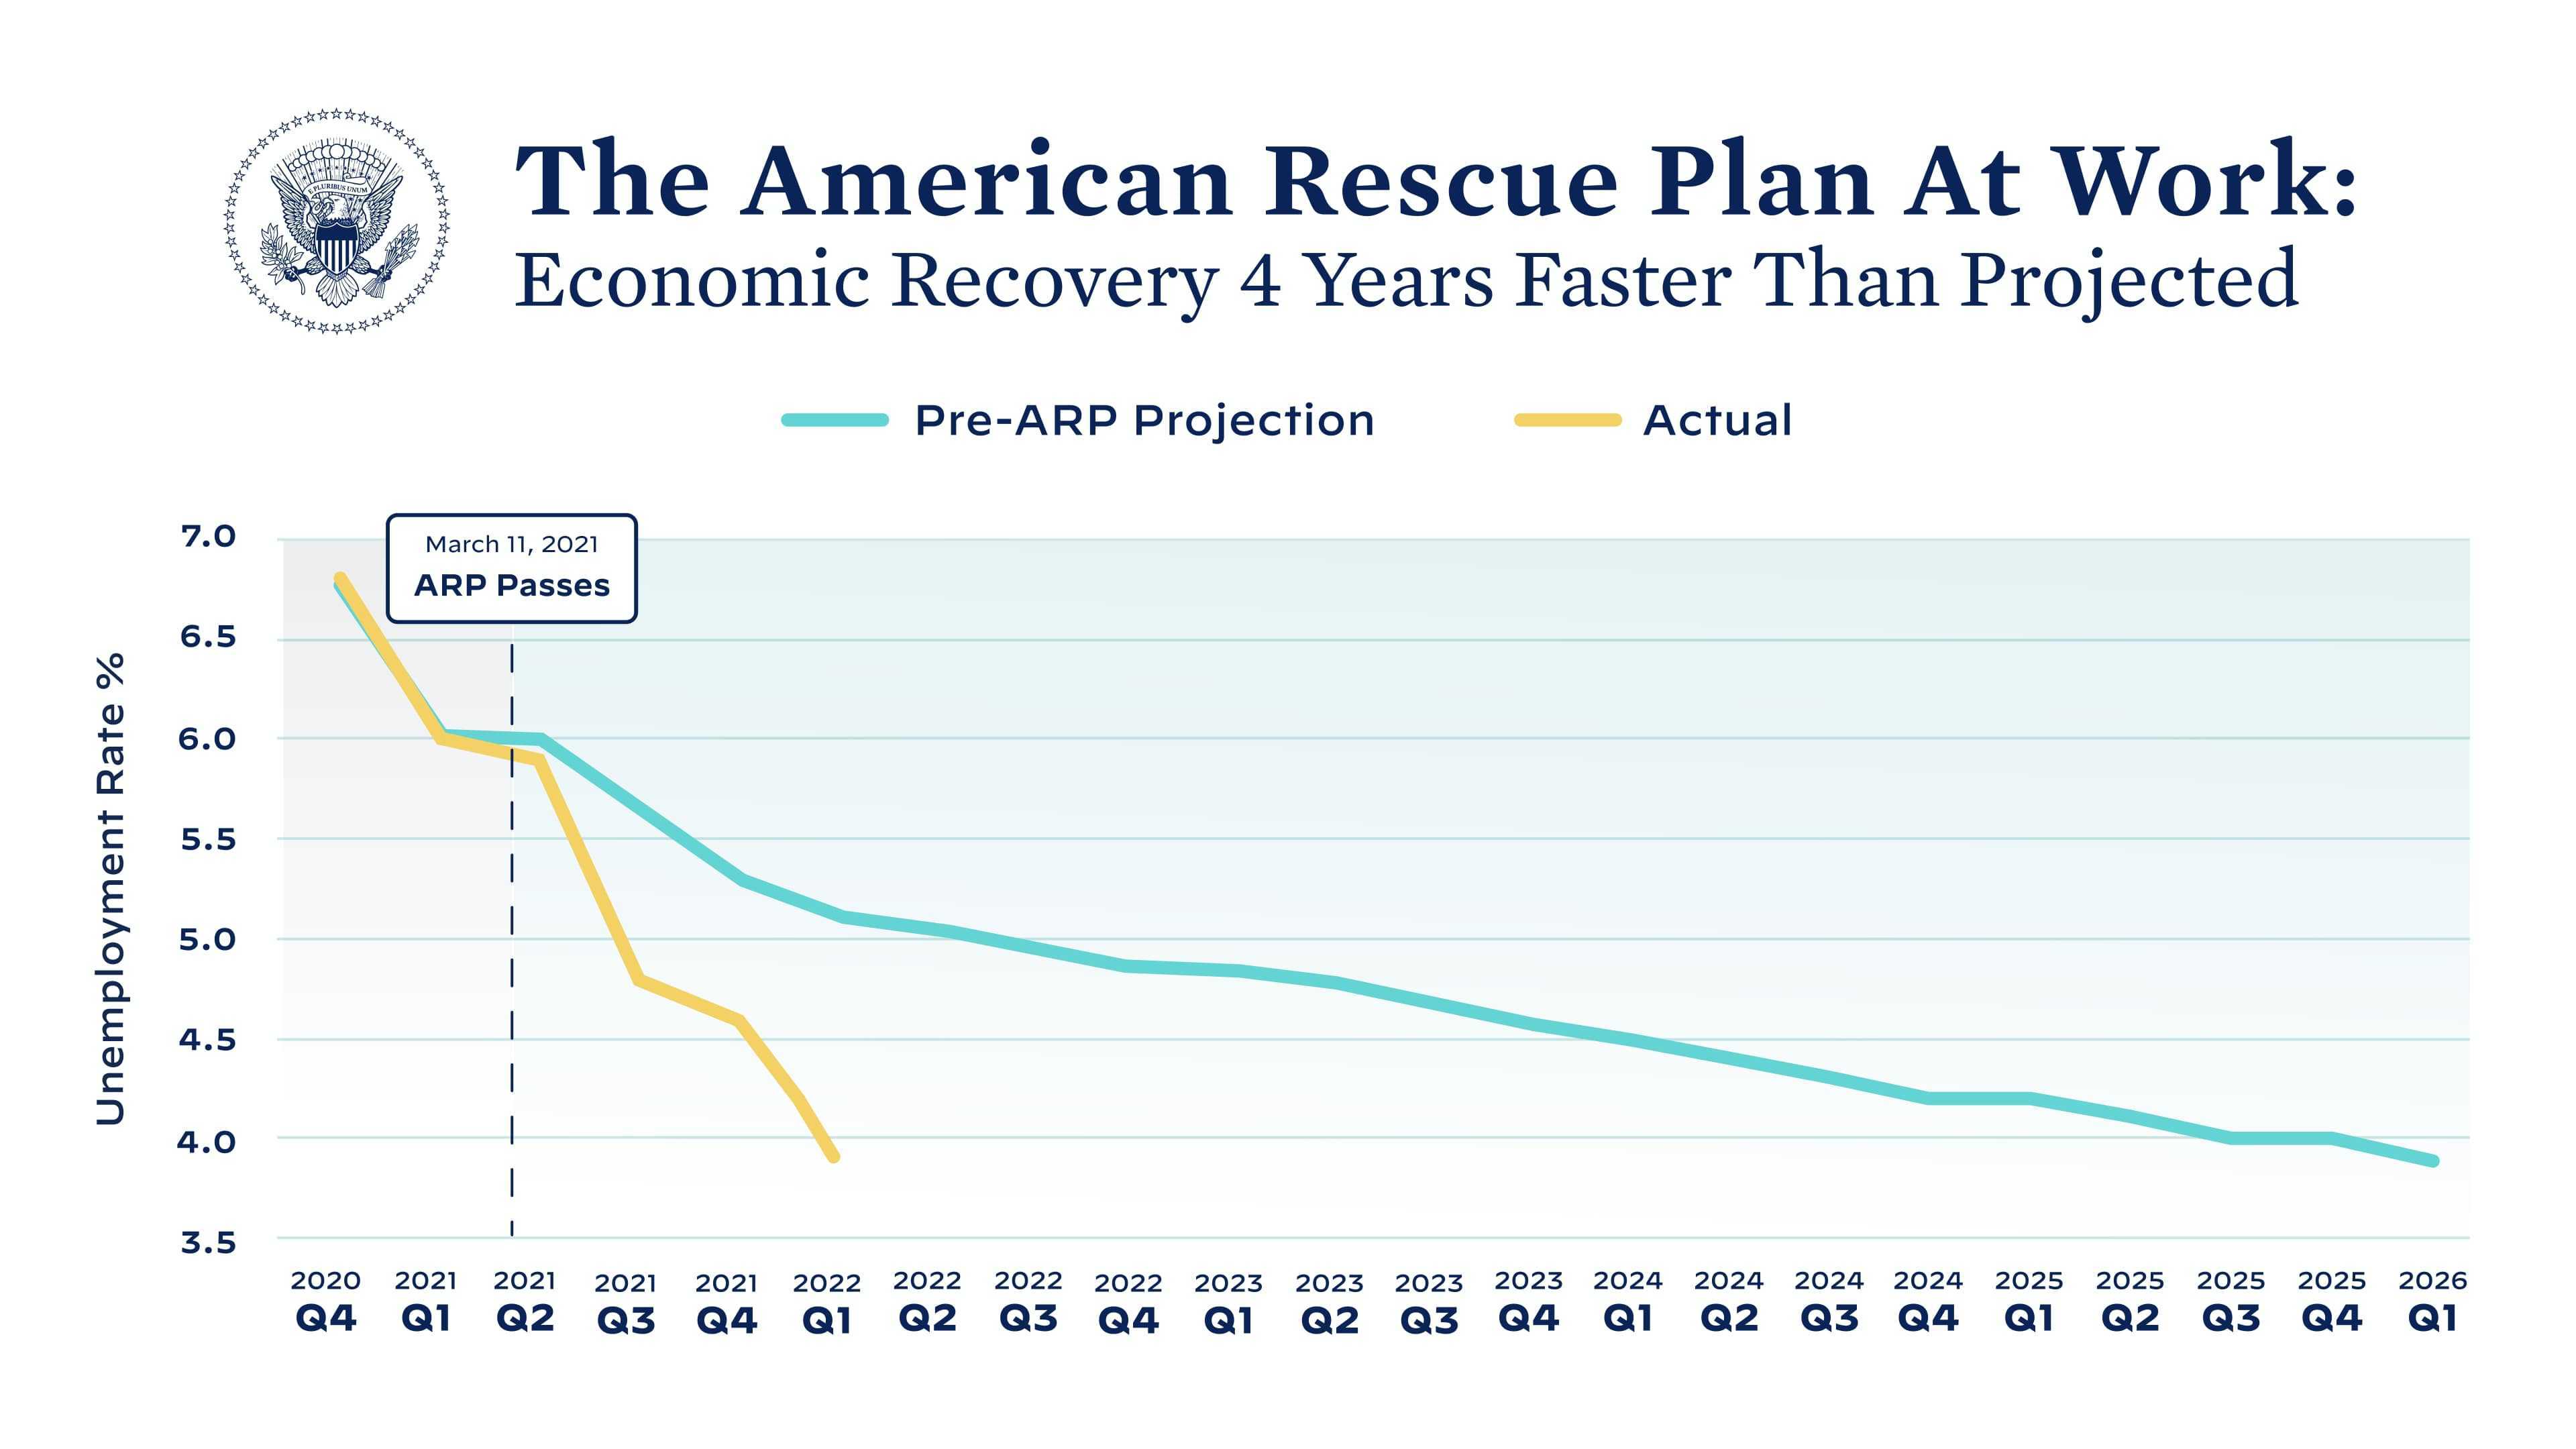 The American Rescue Plan At Work: Economic Recovery 4 Years Faster Than Projected